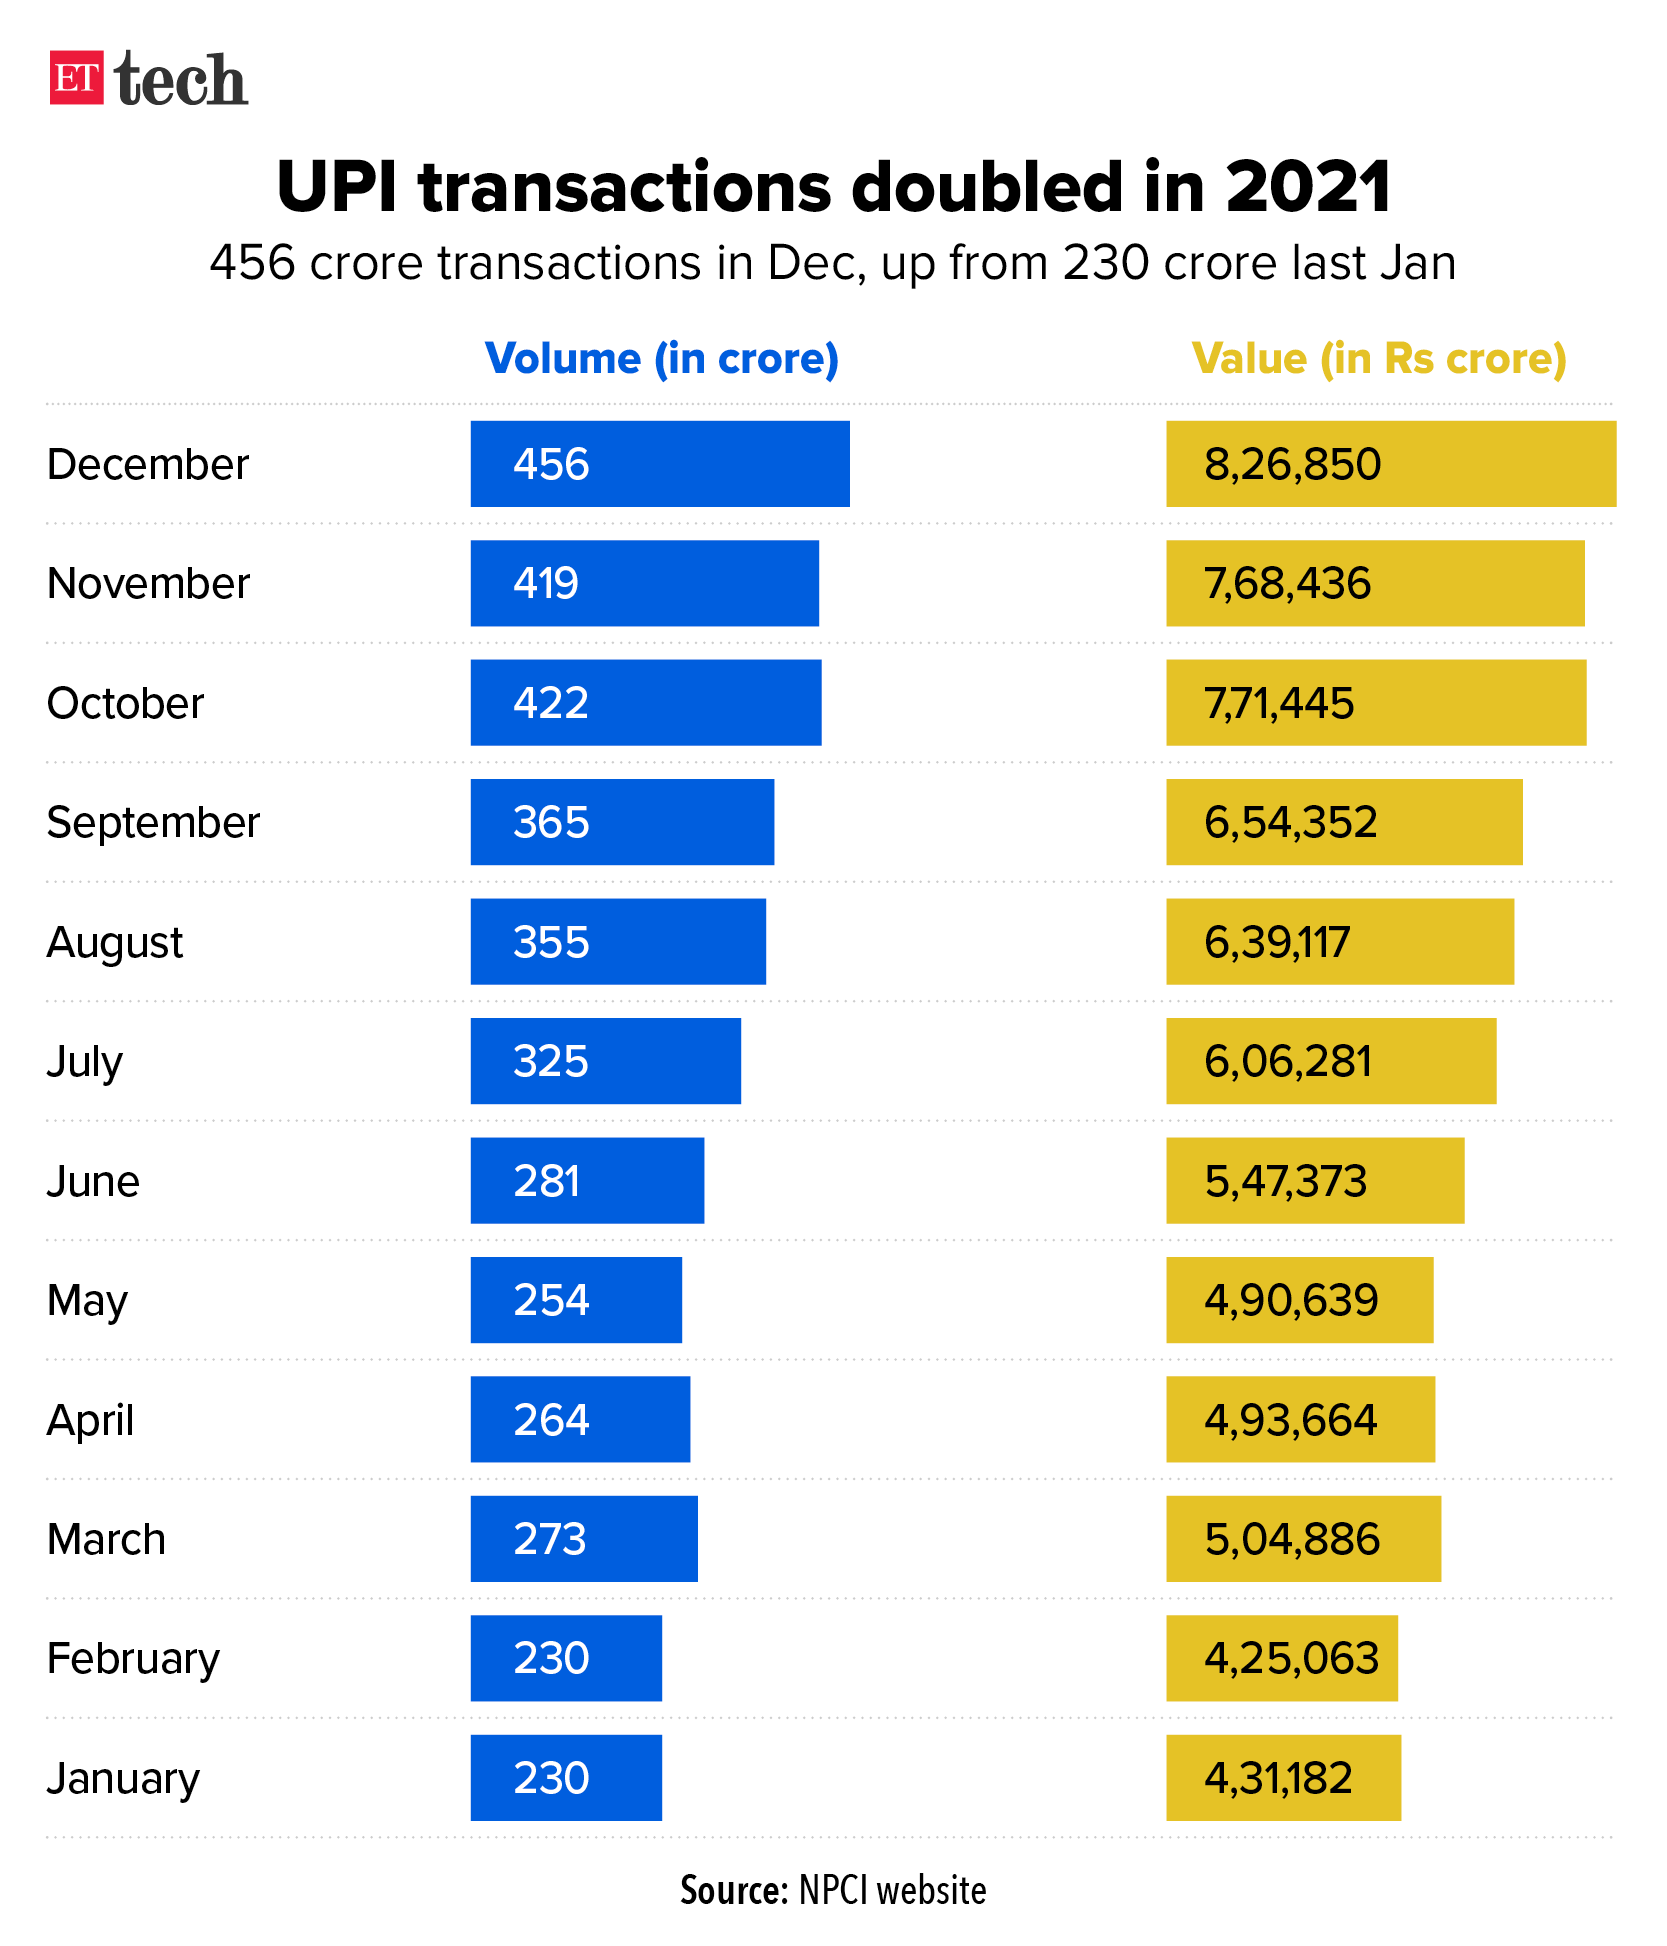 UPI transactions doubled in 2021